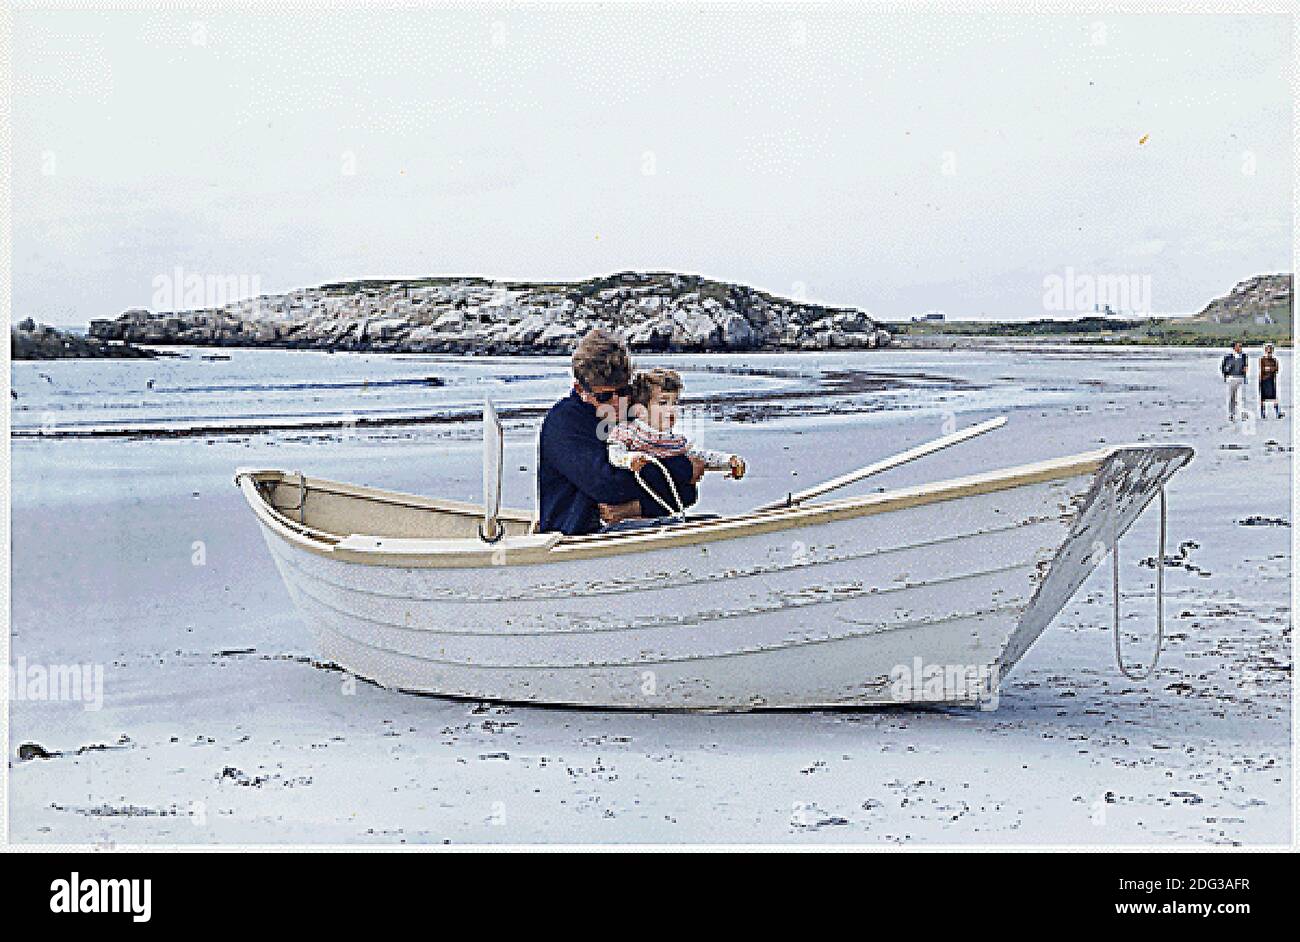 United States President John F. Kennedy plays with his son, John F. Kennedy, Jr., in beached rowboat during a weekend on Bailey's Beach in Newport, Rhode Island , RI, USA, on September 15, 1963. Photo by White House via CNP Stock Photo